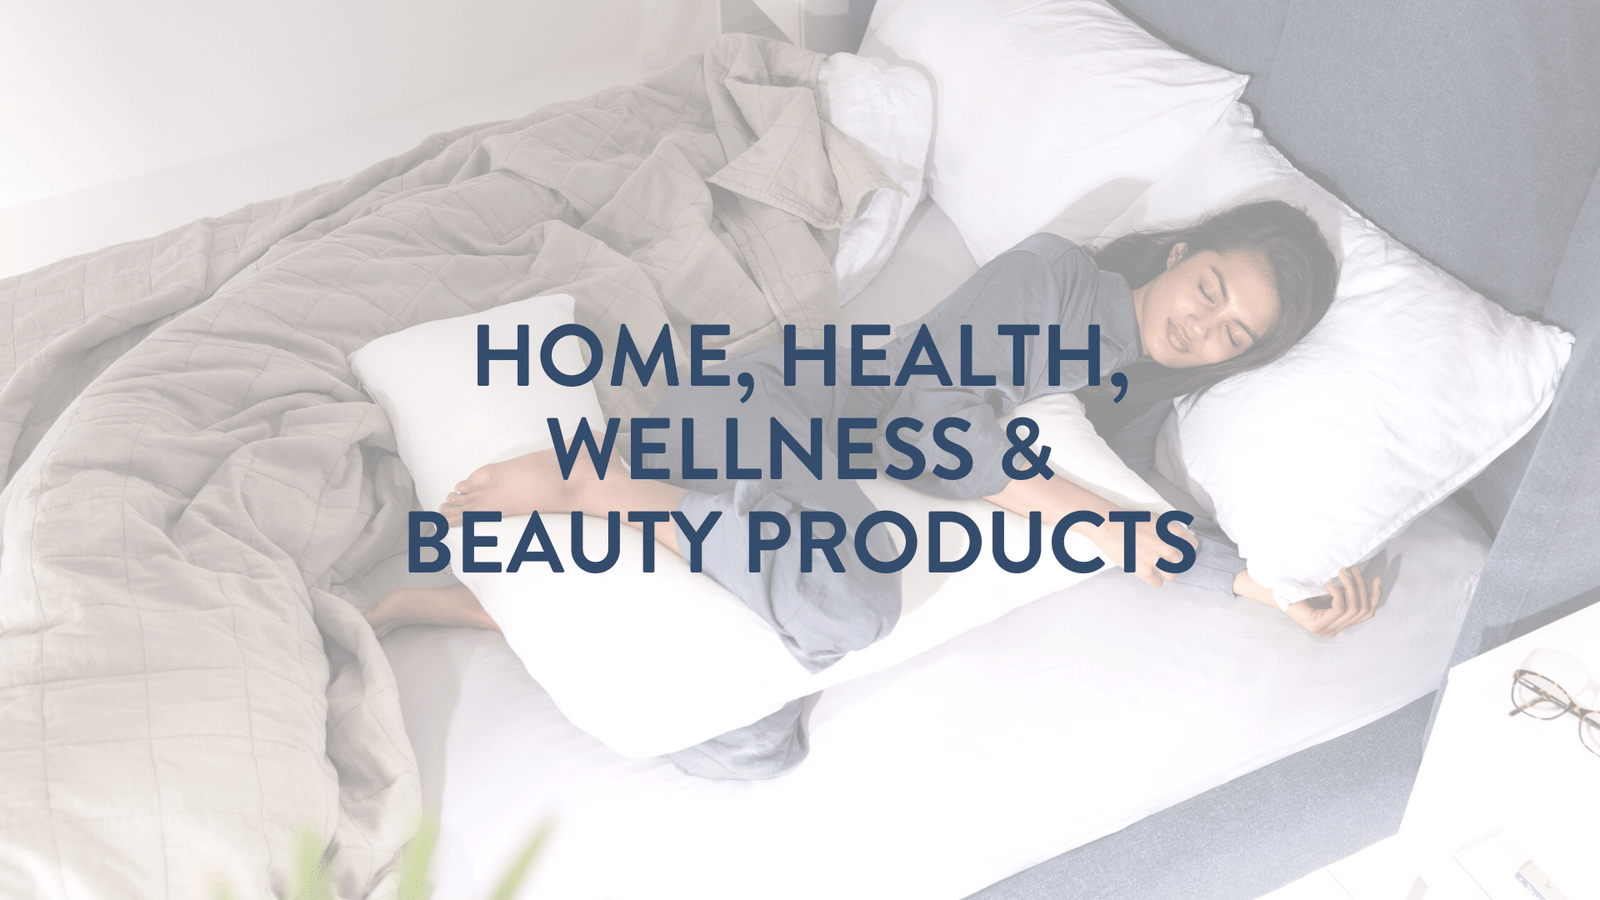 Home, Health, Wellness & Beauty products - Wholesale, Trade, Manufacturer UK pillows cushions mattresses